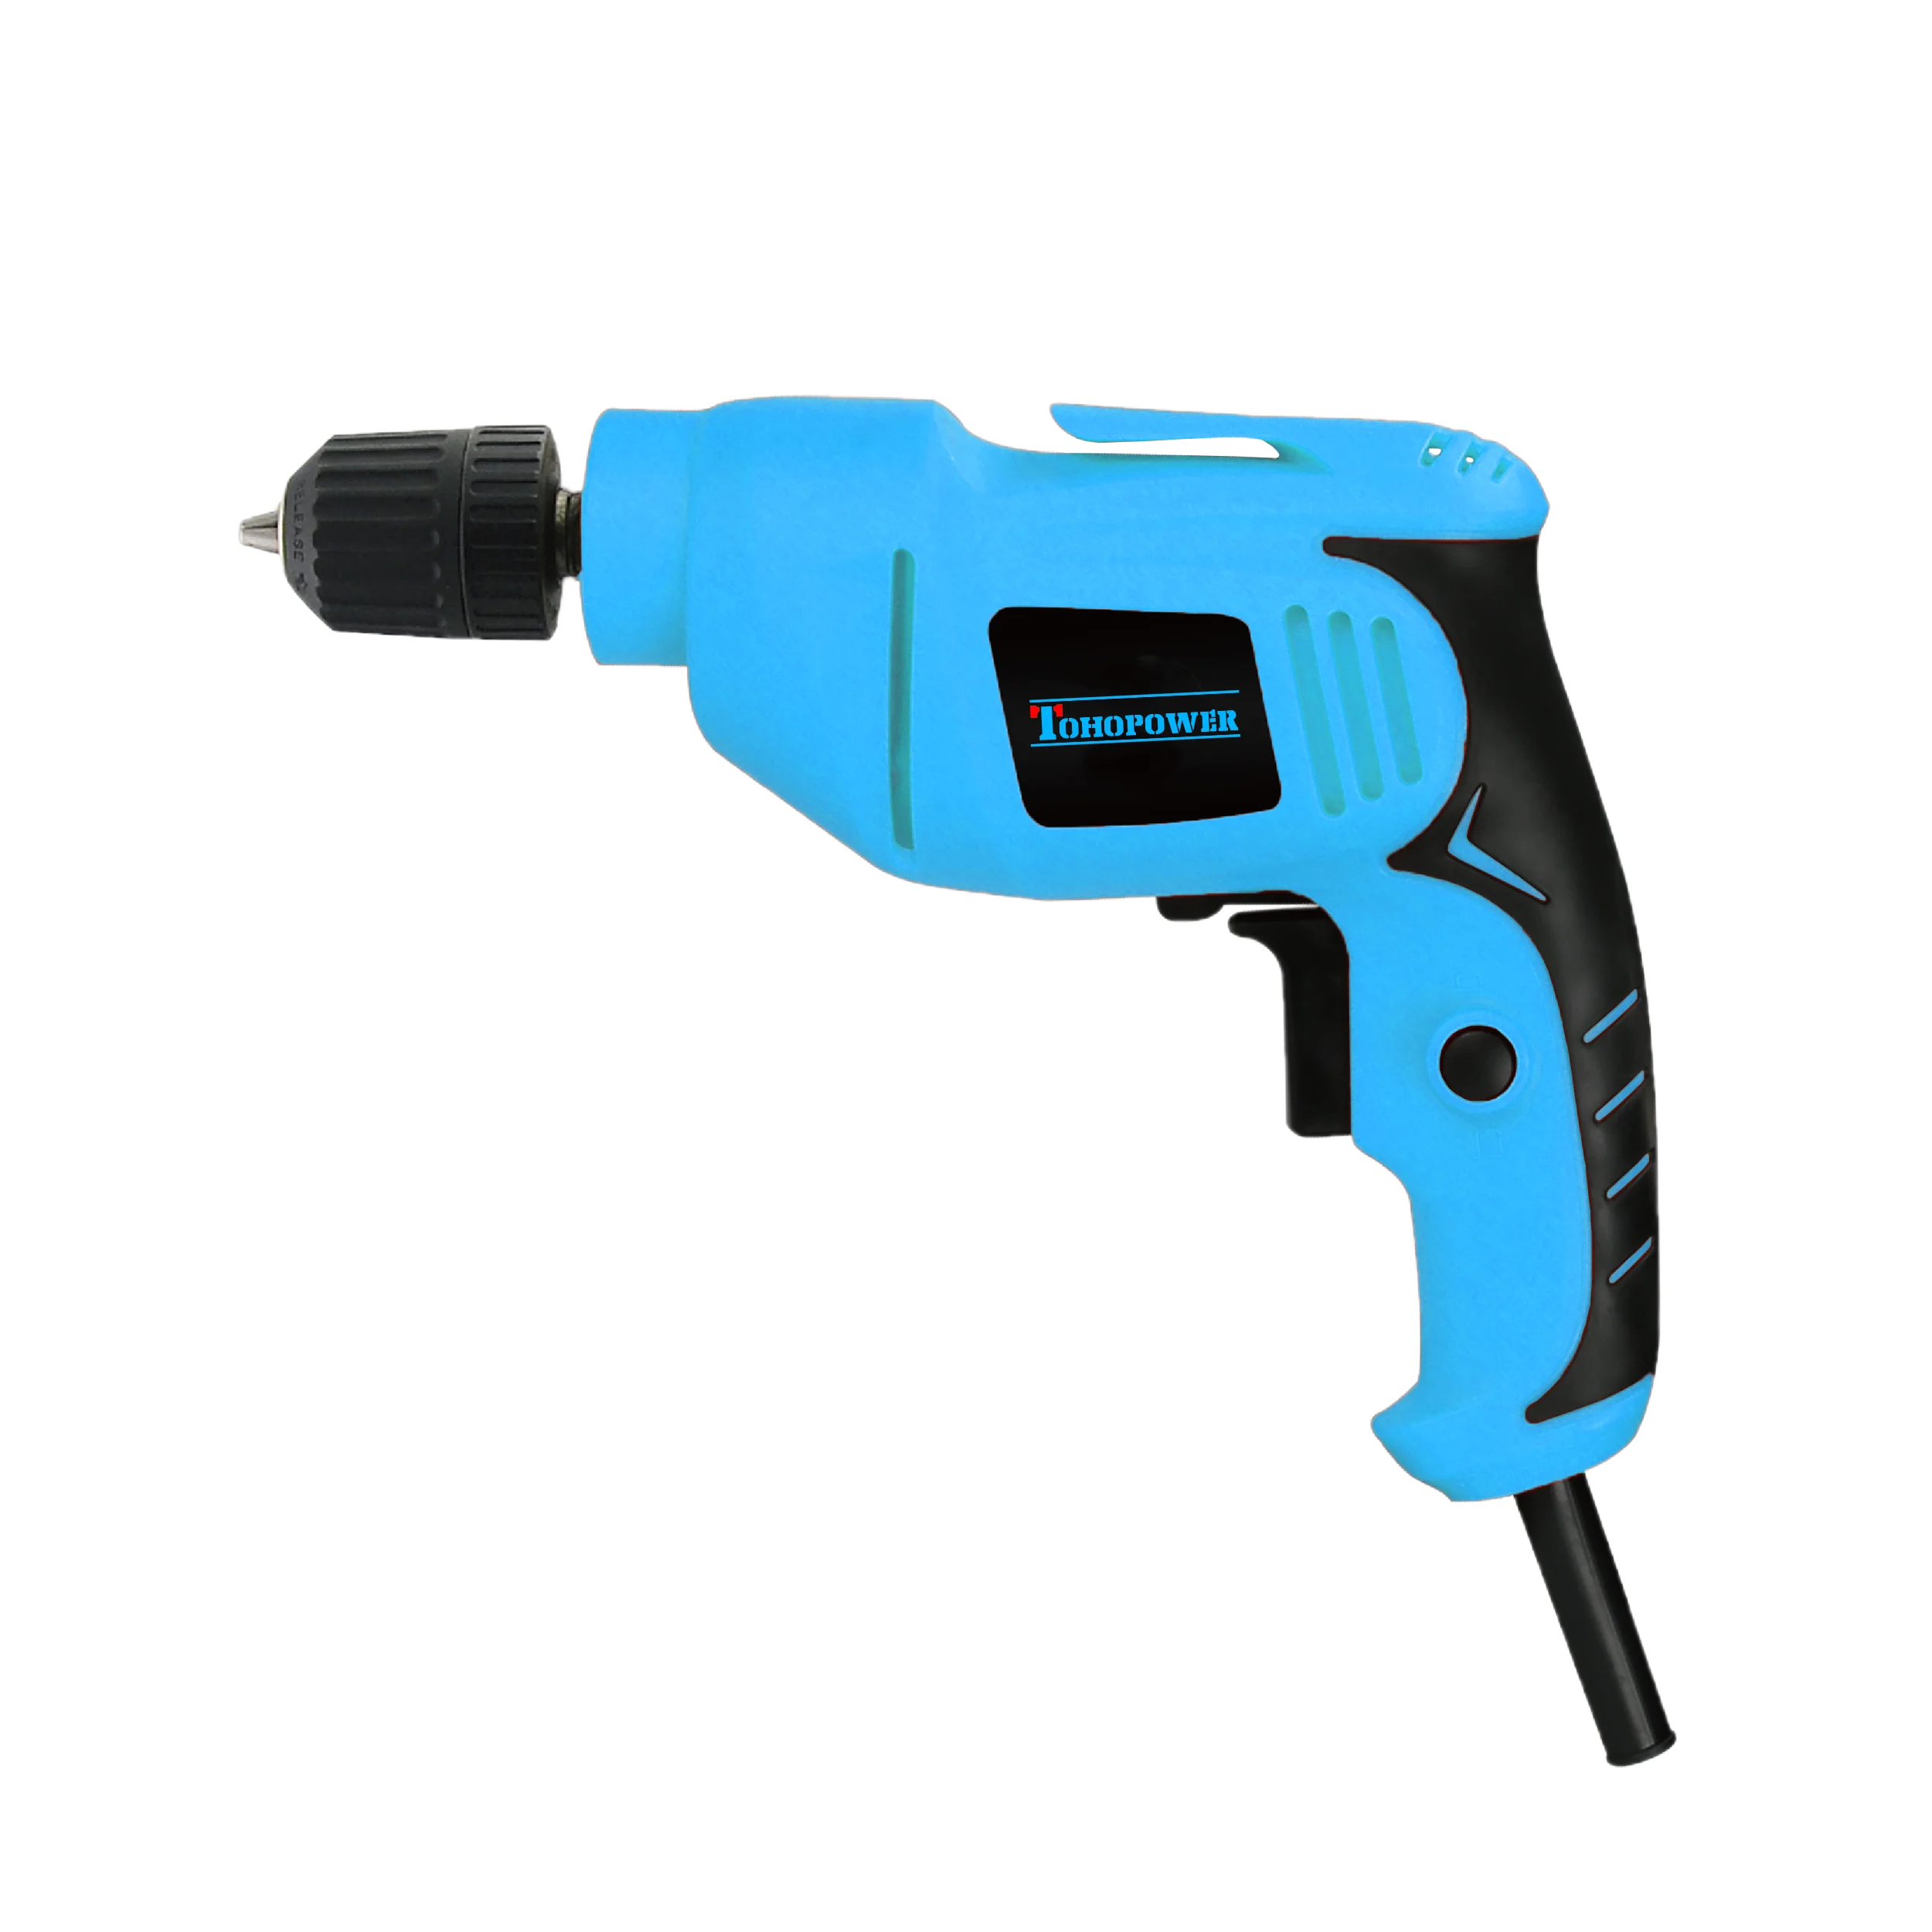 10mm 500w Electric Drill - Buy Mini Electric Drill,Straight Electric ...